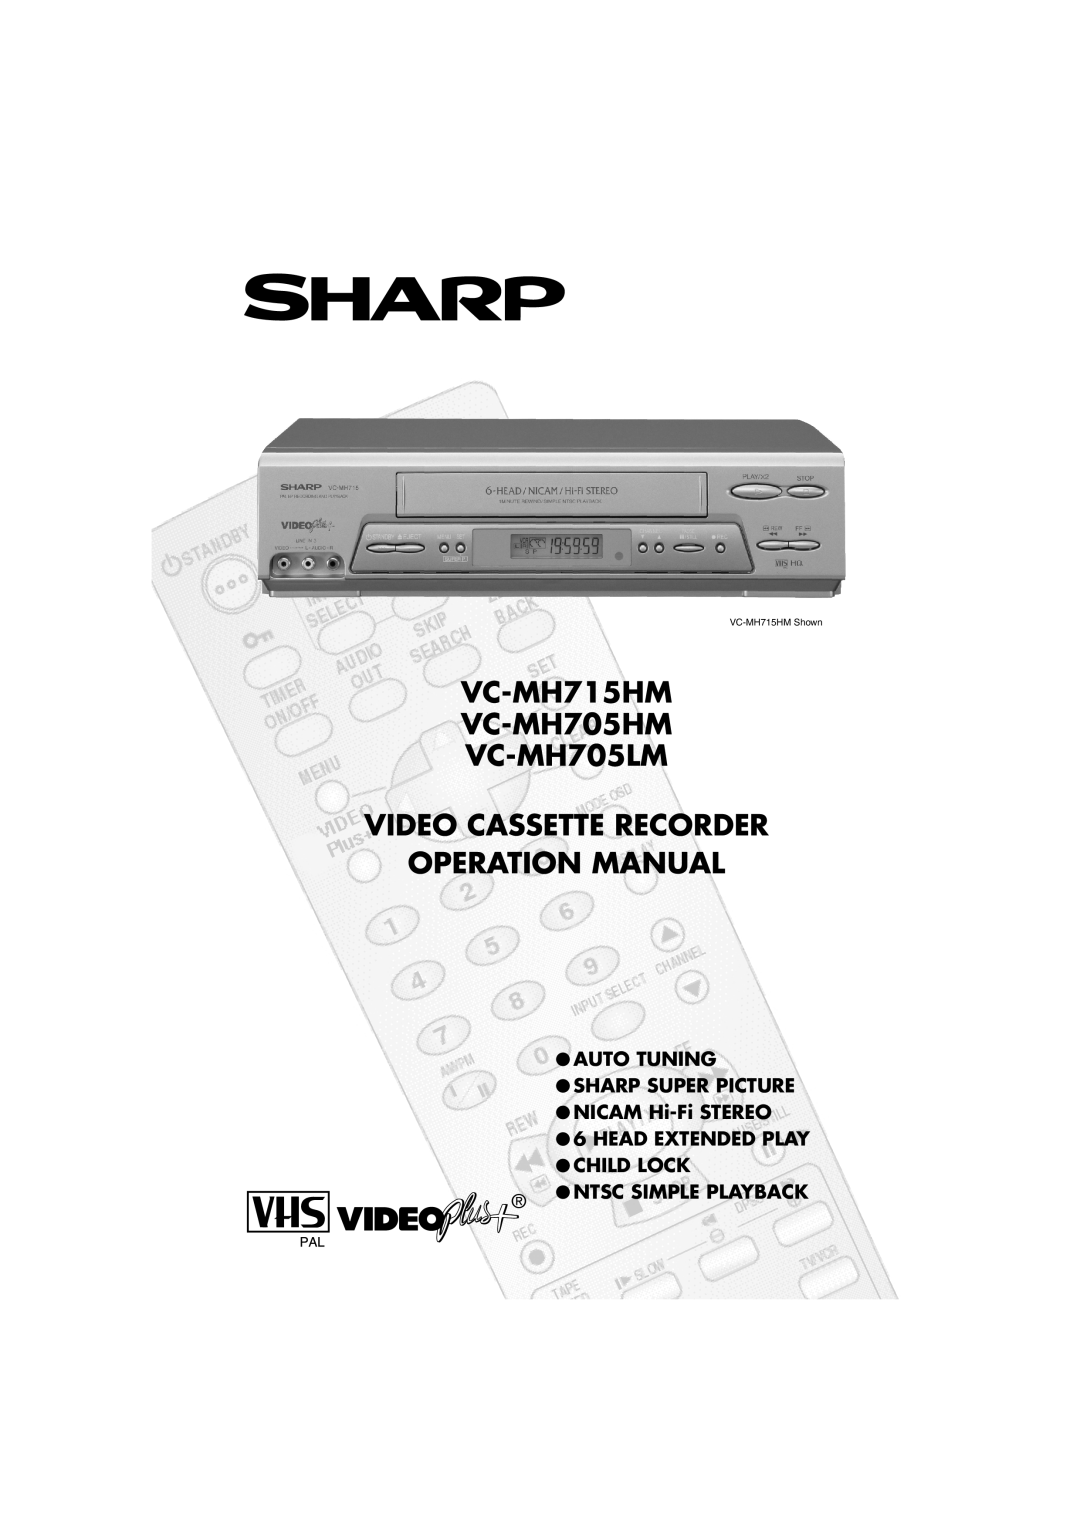 Sharp operation manual VC-MH715HM VC-MH705HM VC-MH705LM, AUTO TUNING SHARP SUPER PICTURE NICAM Hi-FiSTEREO 